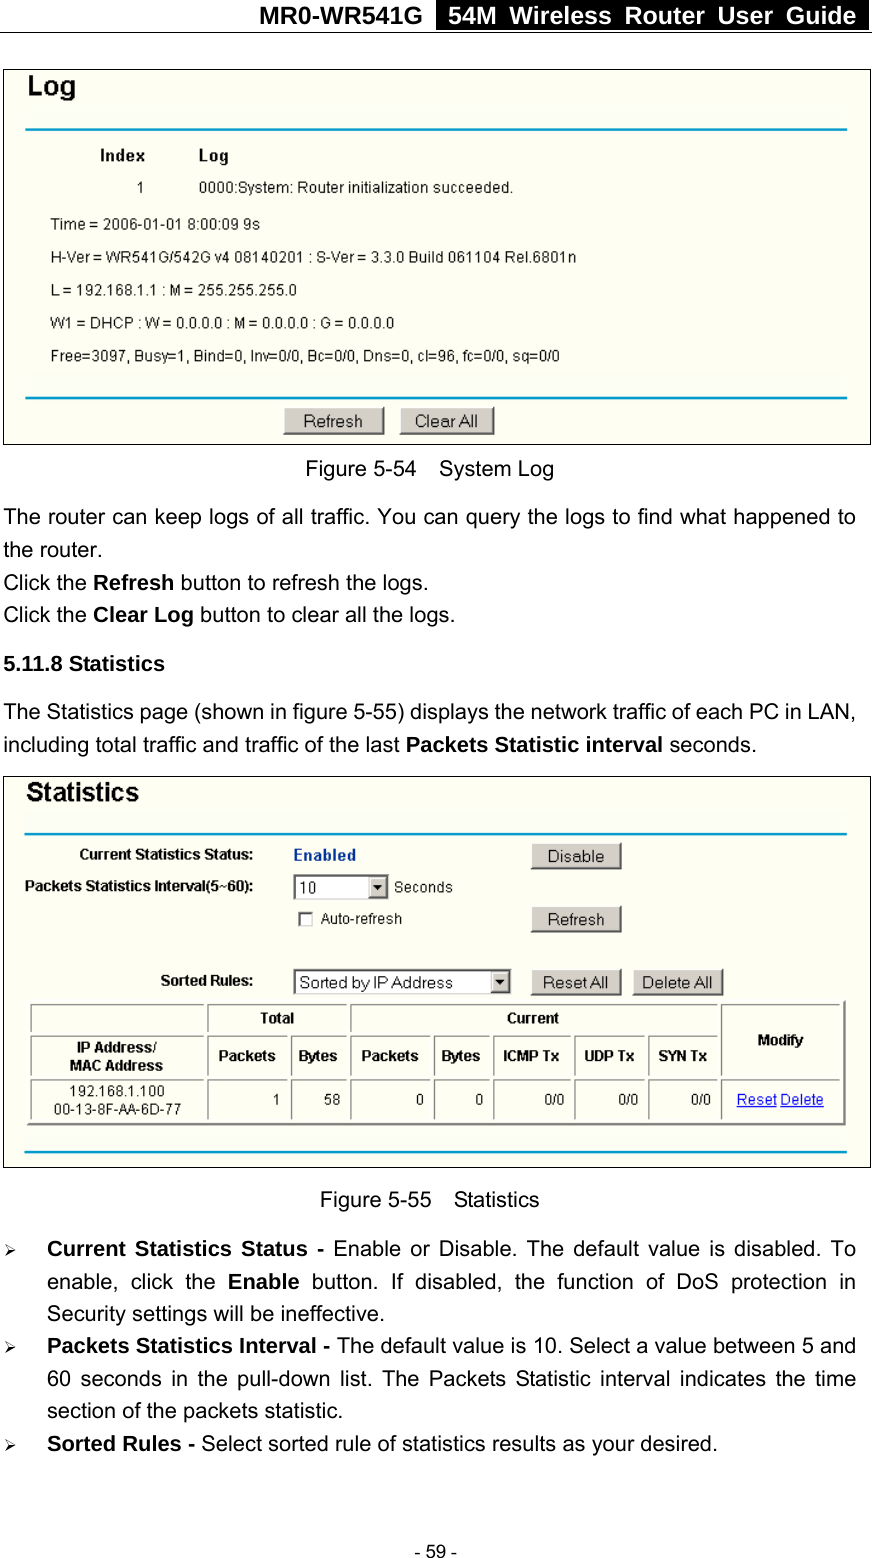 MR0-WR541G   54M Wireless Router User Guide   Figure 5-54  System Log The router can keep logs of all traffic. You can query the logs to find what happened to the router. Click the Refresh button to refresh the logs. Click the Clear Log button to clear all the logs. 5.11.8 Statistics The Statistics page (shown in figure 5-55) displays the network traffic of each PC in LAN, including total traffic and traffic of the last Packets Statistic interval seconds.    Figure 5-55  Statistics ¾ Current Statistics Status - Enable or Disable. The default value is disabled. To enable, click the Enable button. If disabled, the function of DoS protection in Security settings will be ineffective.   ¾ Packets Statistics Interval - The default value is 10. Select a value between 5 and 60 seconds in the pull-down list. The Packets Statistic interval indicates the time section of the packets statistic.   ¾ Sorted Rules - Select sorted rule of statistics results as your desired.   - 59 - 